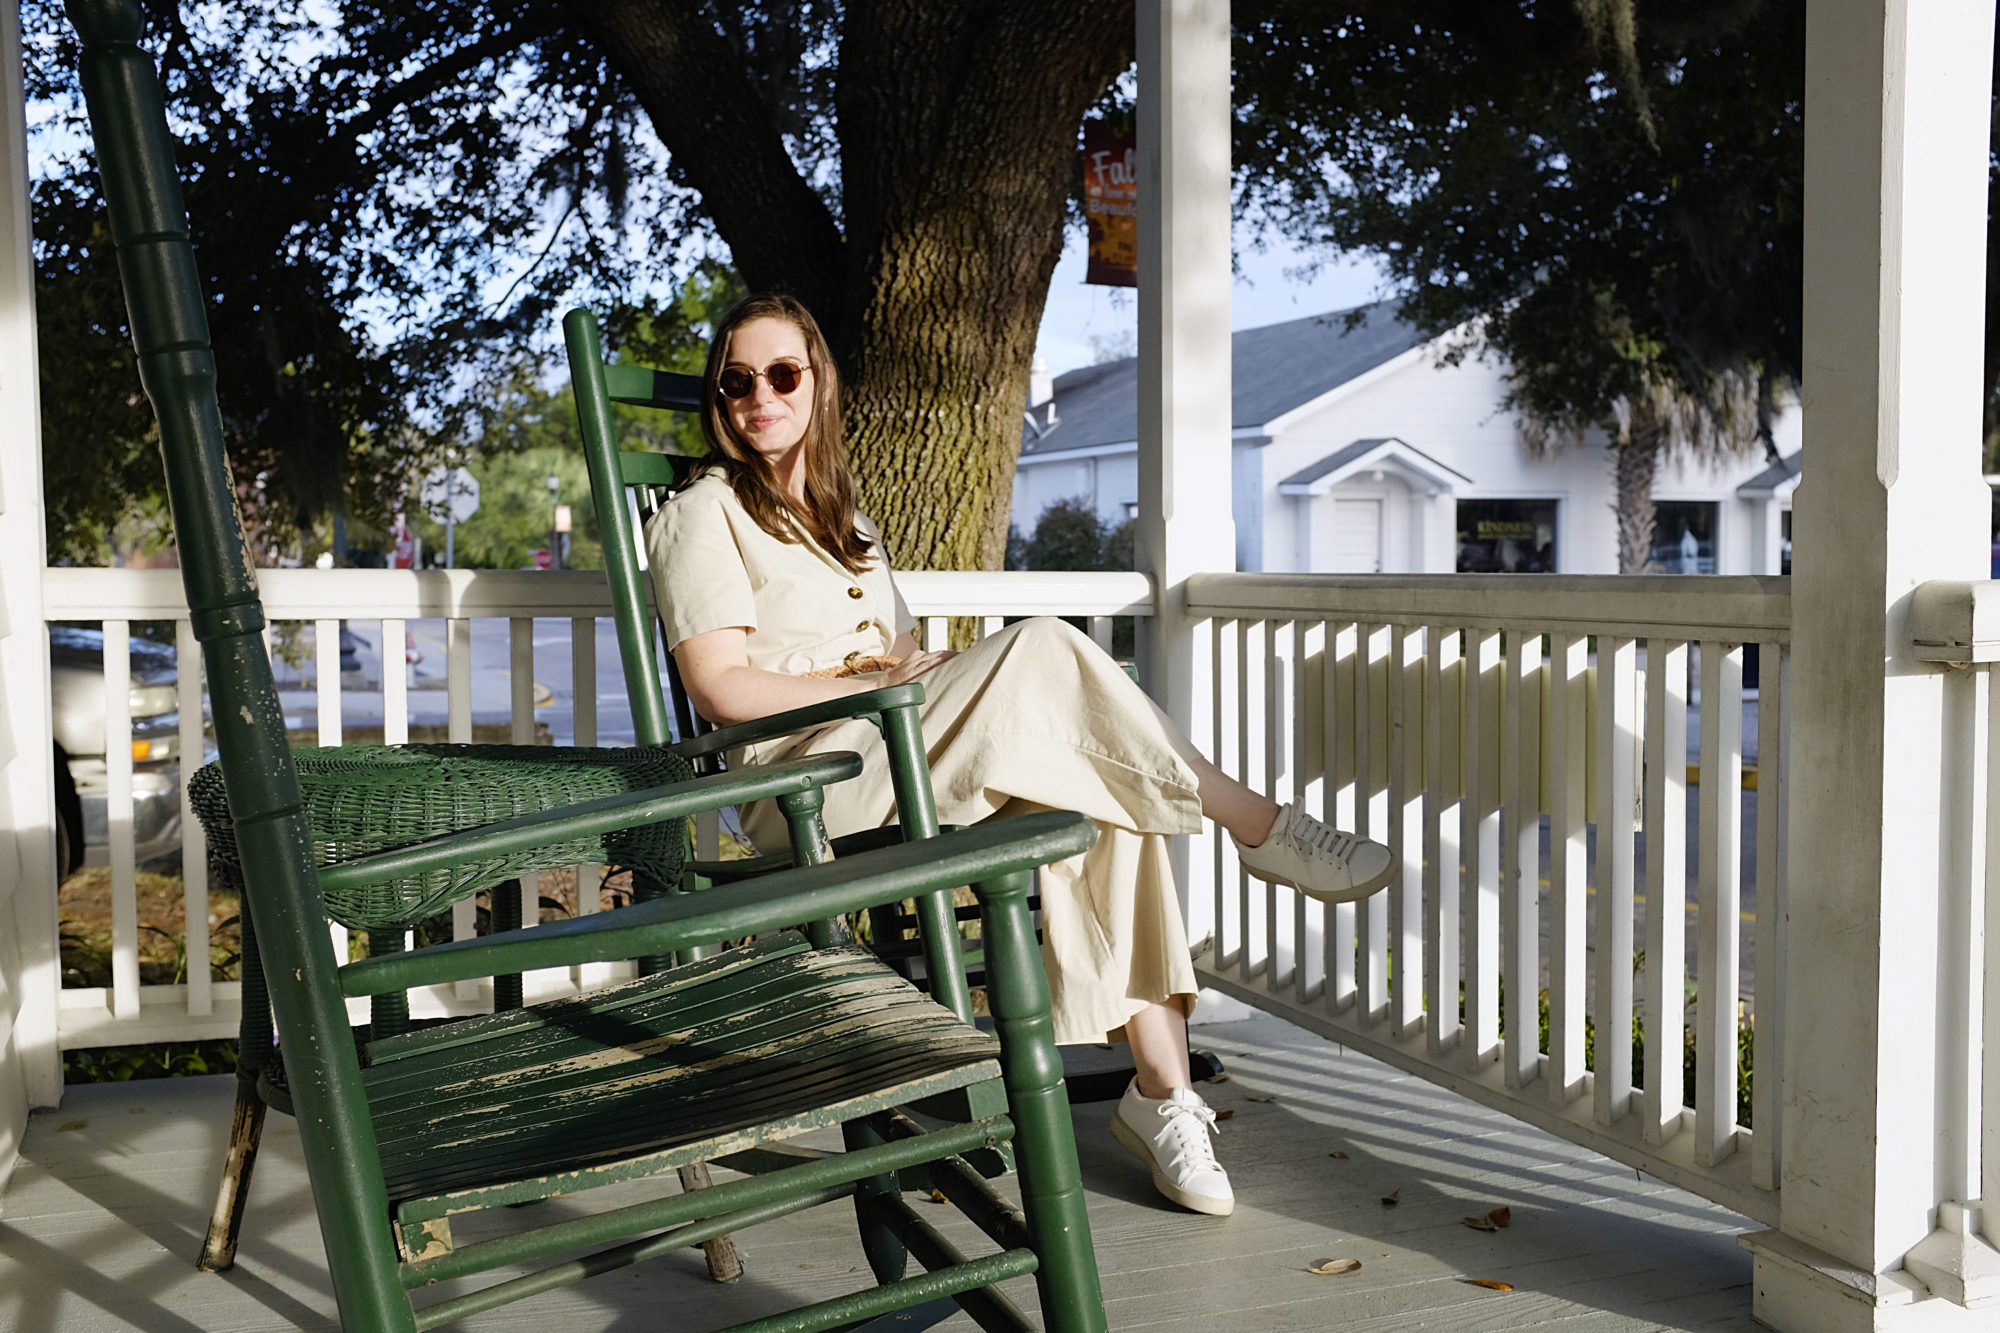 Alyssa sits on a rocking chair at The Beaufort Inn